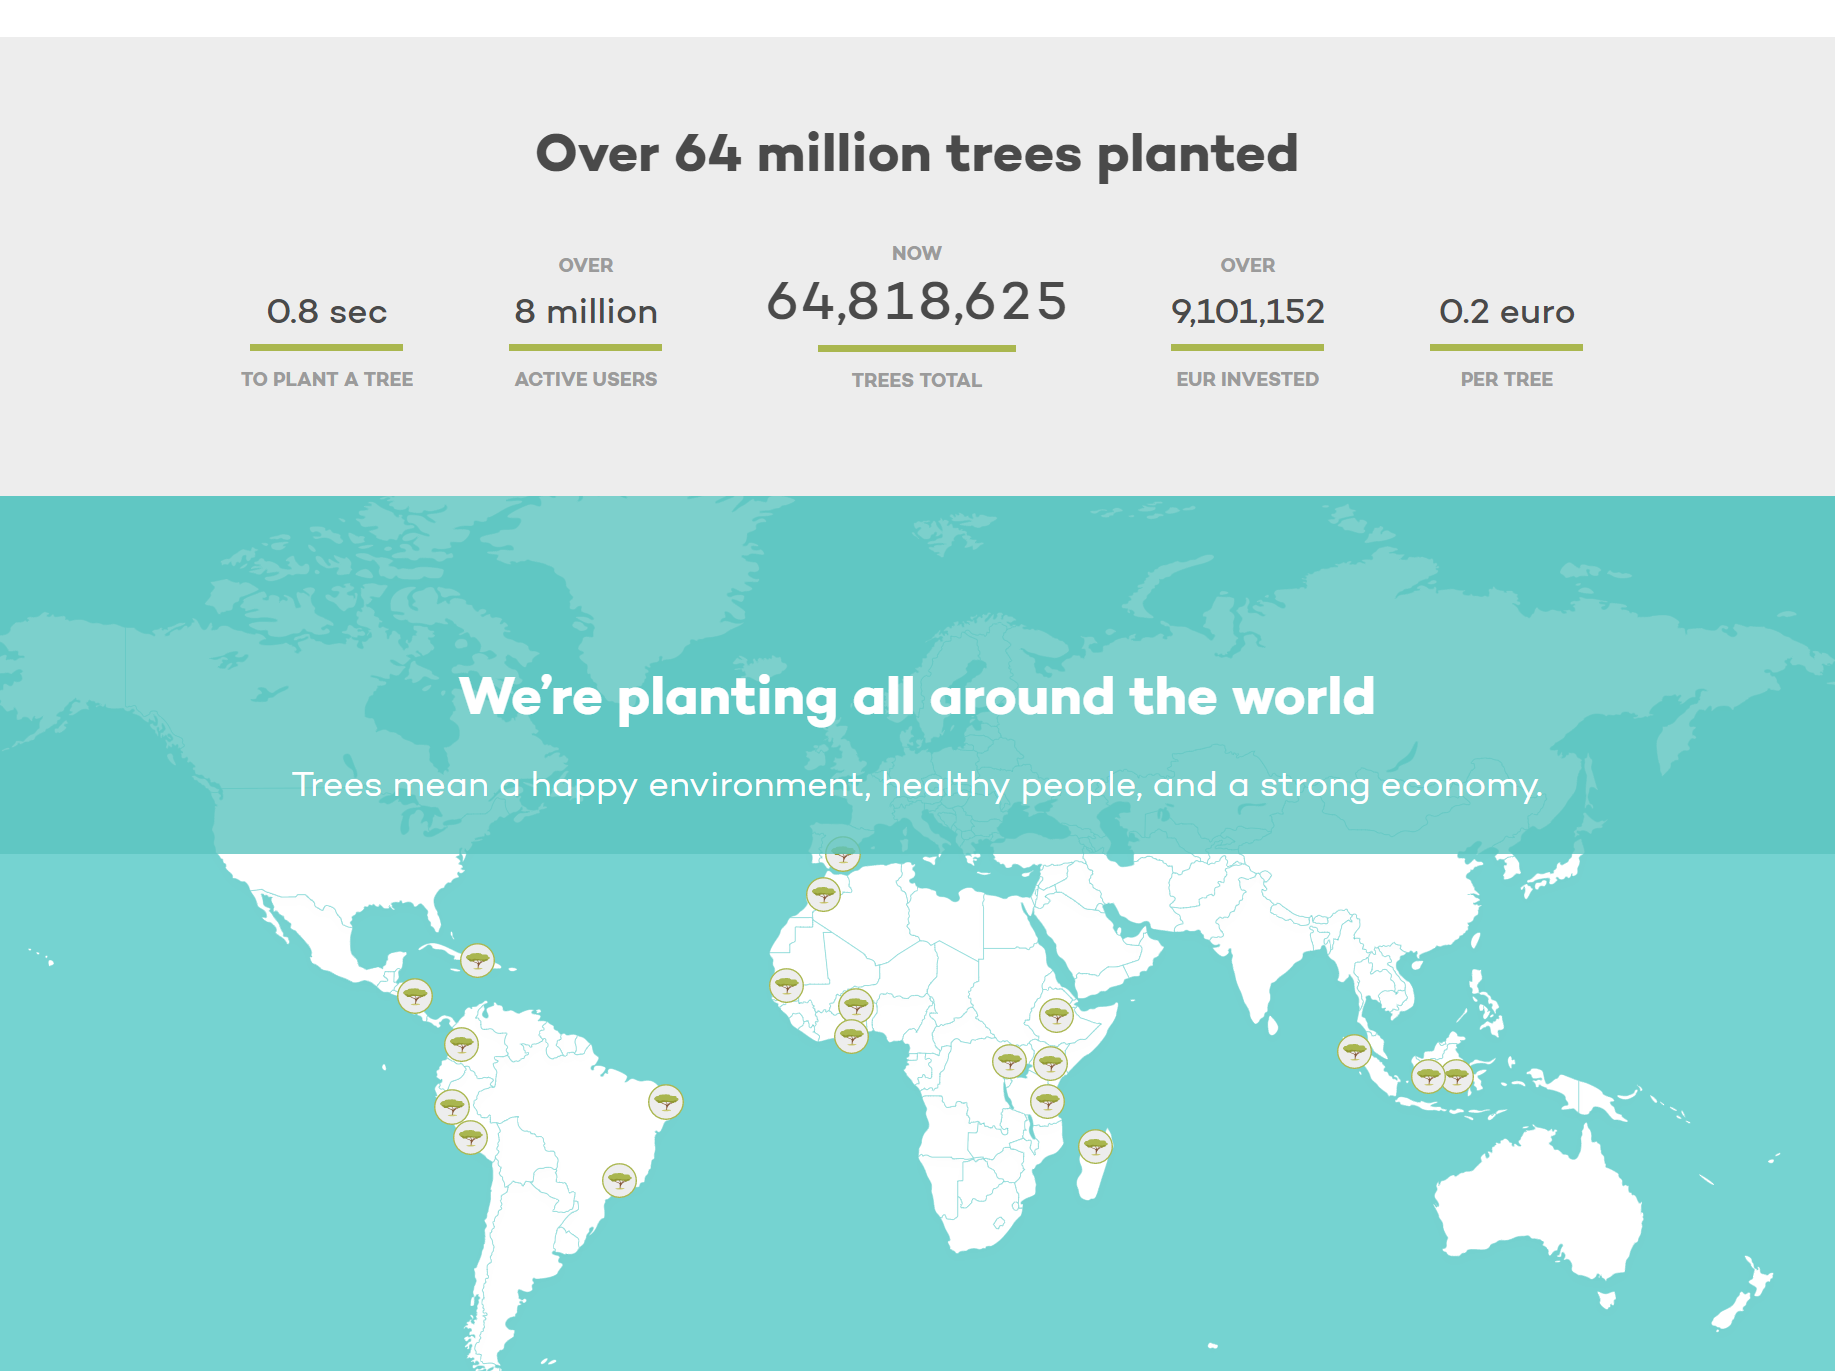 ecosia date launched